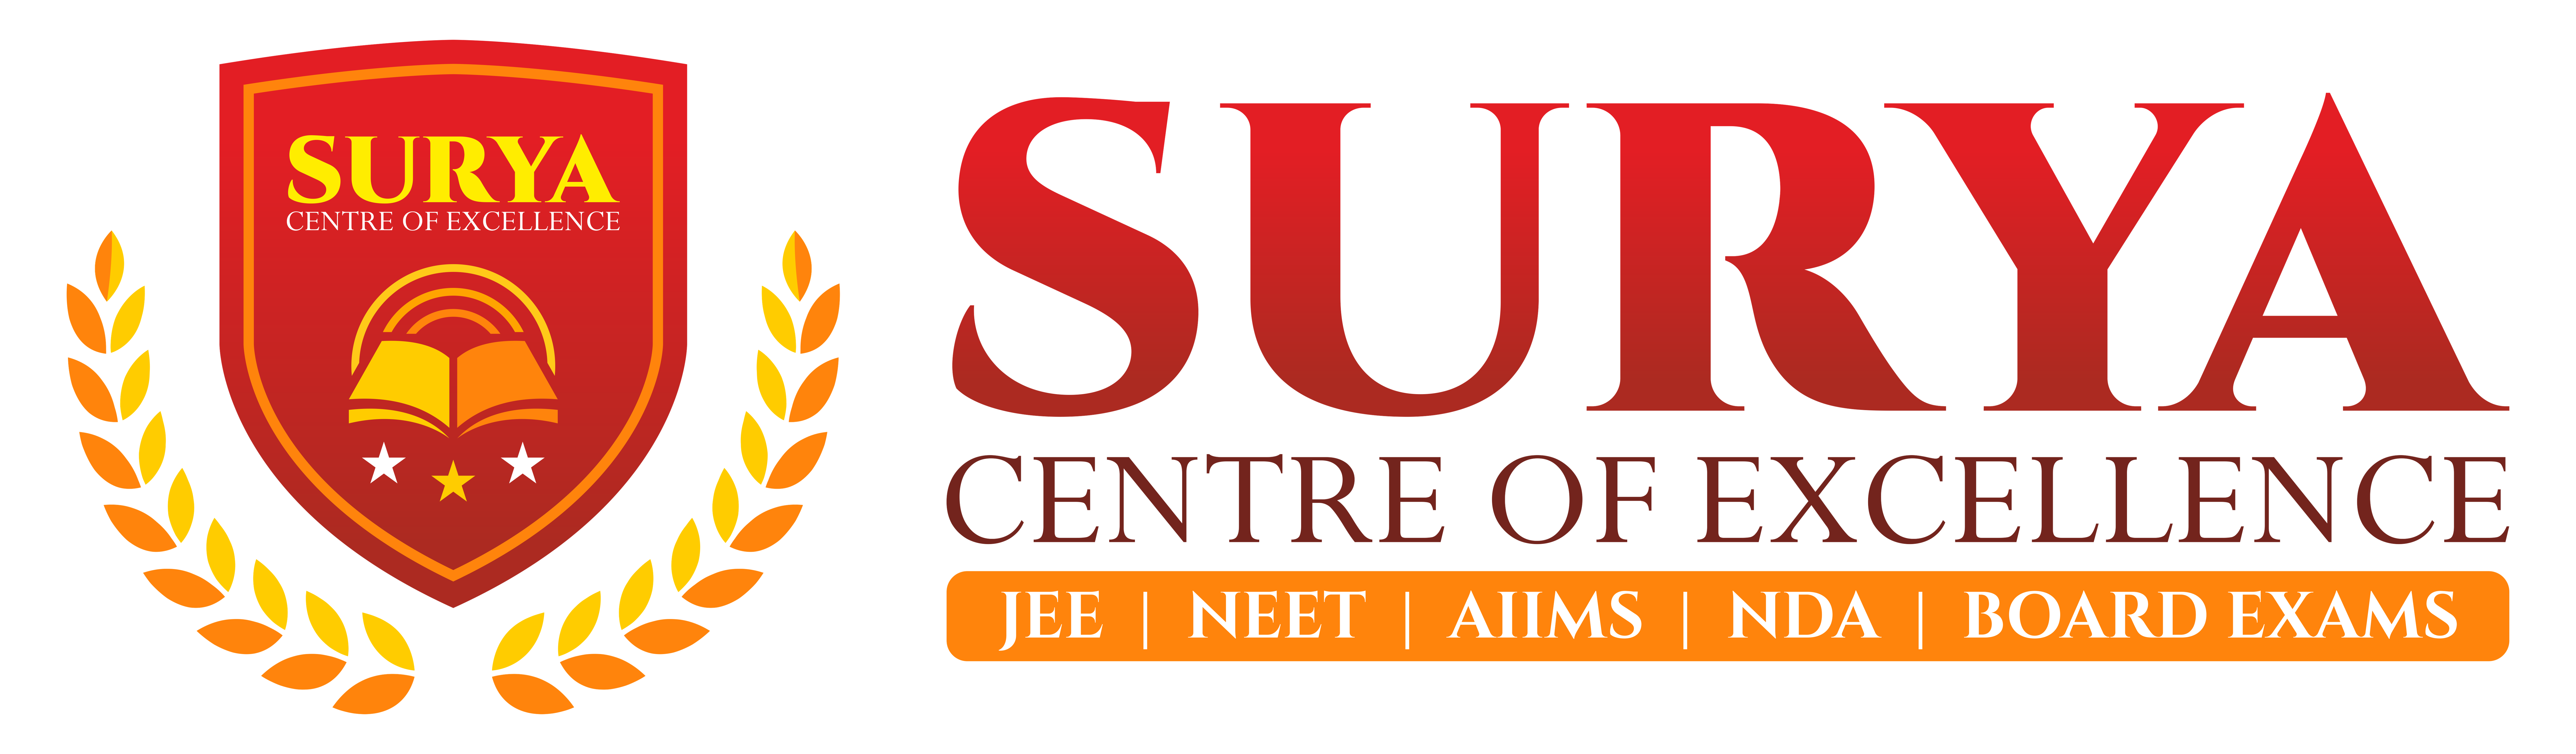 Surya Commerce & Science Coaching Classes - Coaching Center in